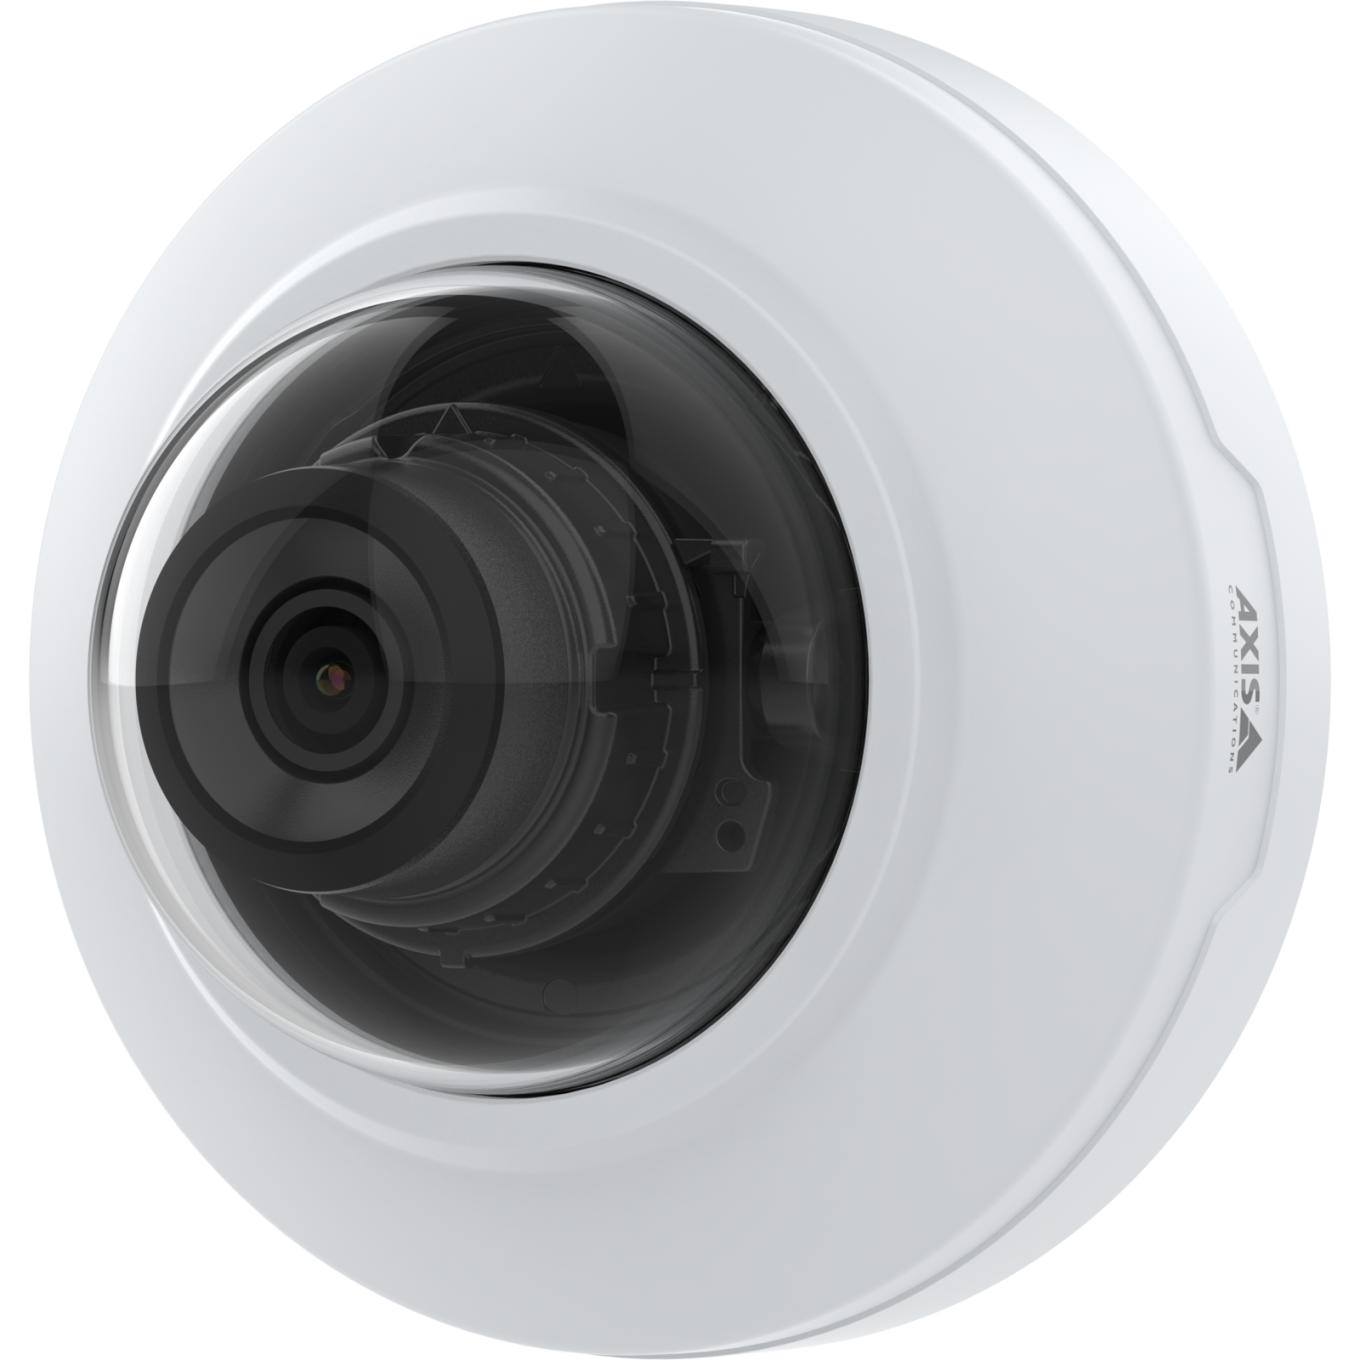 AXIS M4215-LV Dome Camera、壁面設置、左から見た図